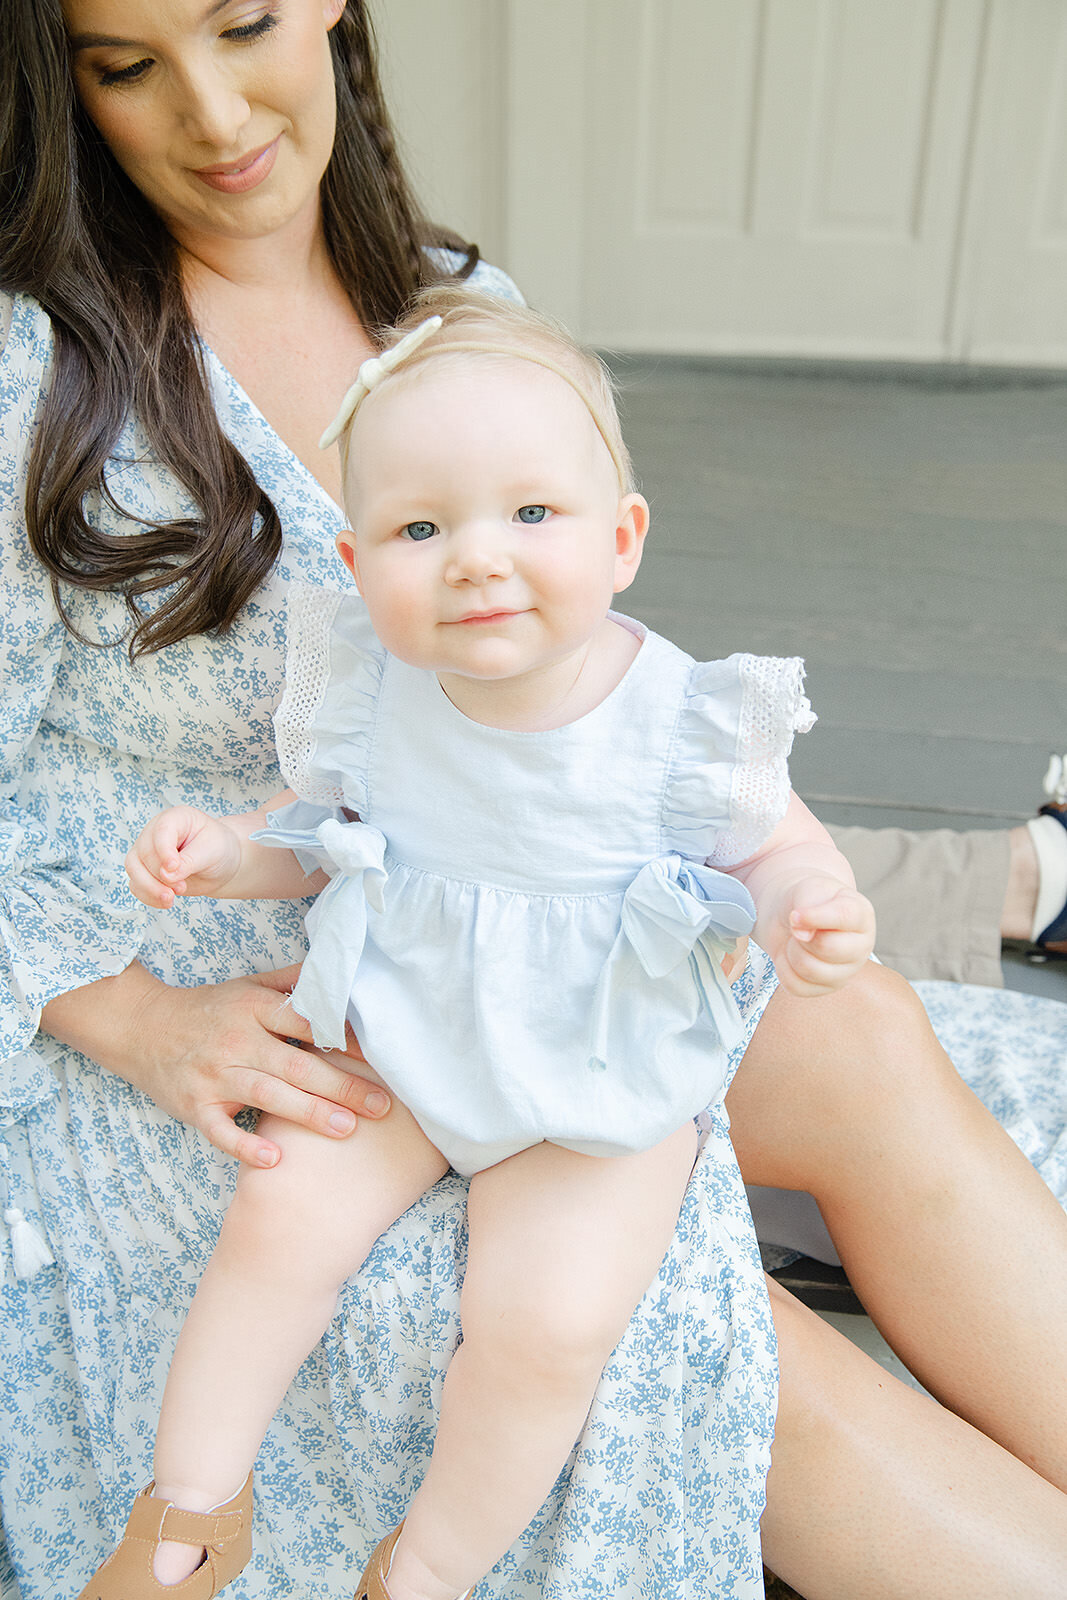 A woman is holding a baby in a blue dress.